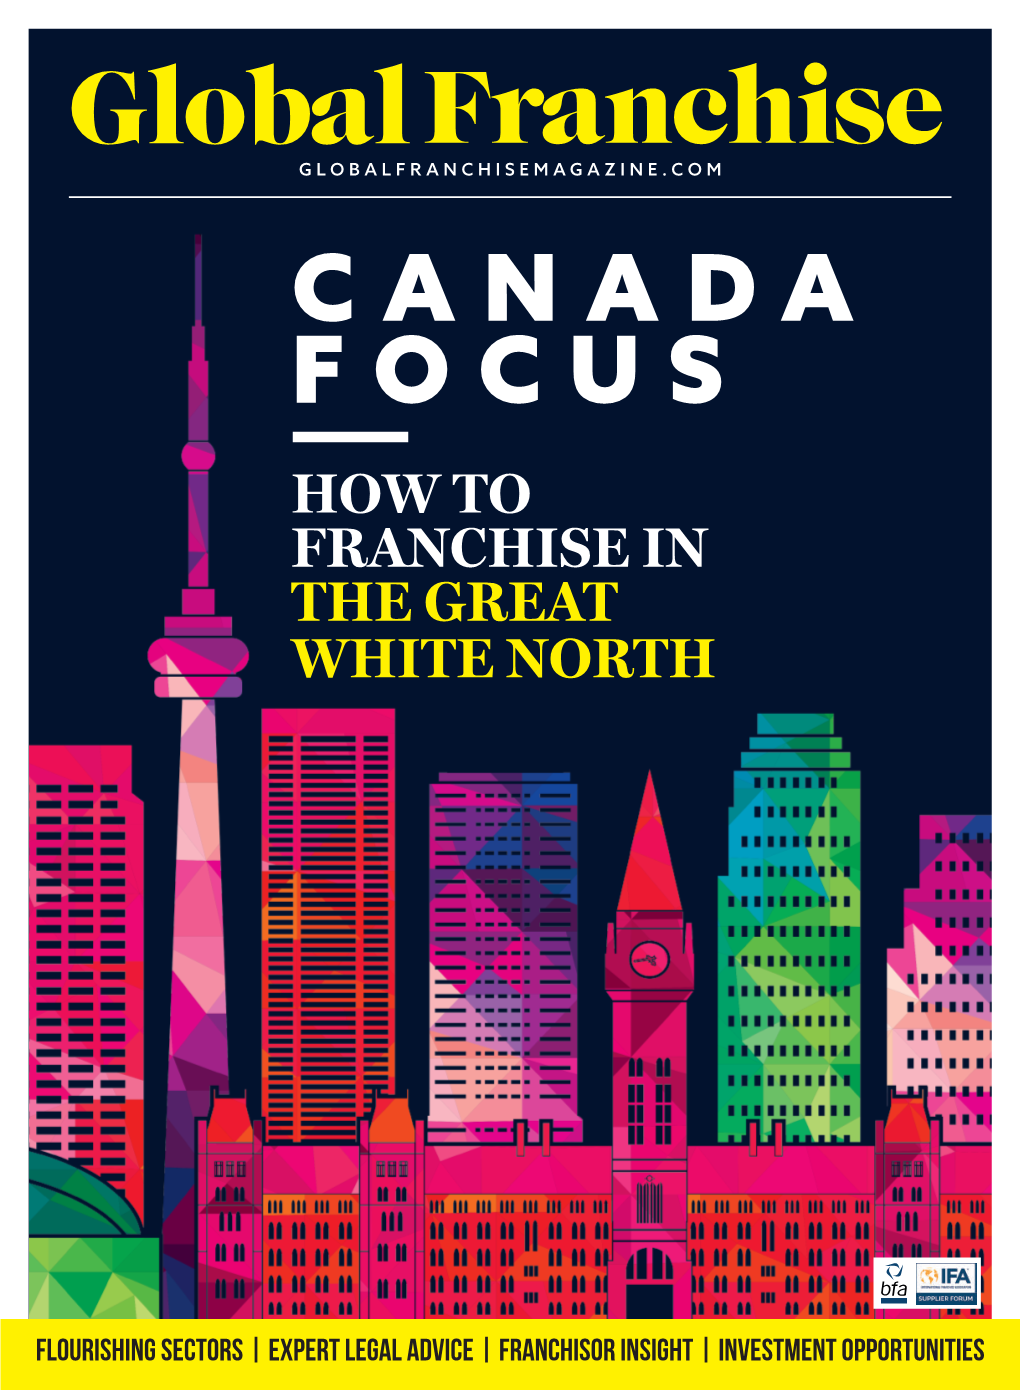 Canada Focus How to Franchise in the Great White North